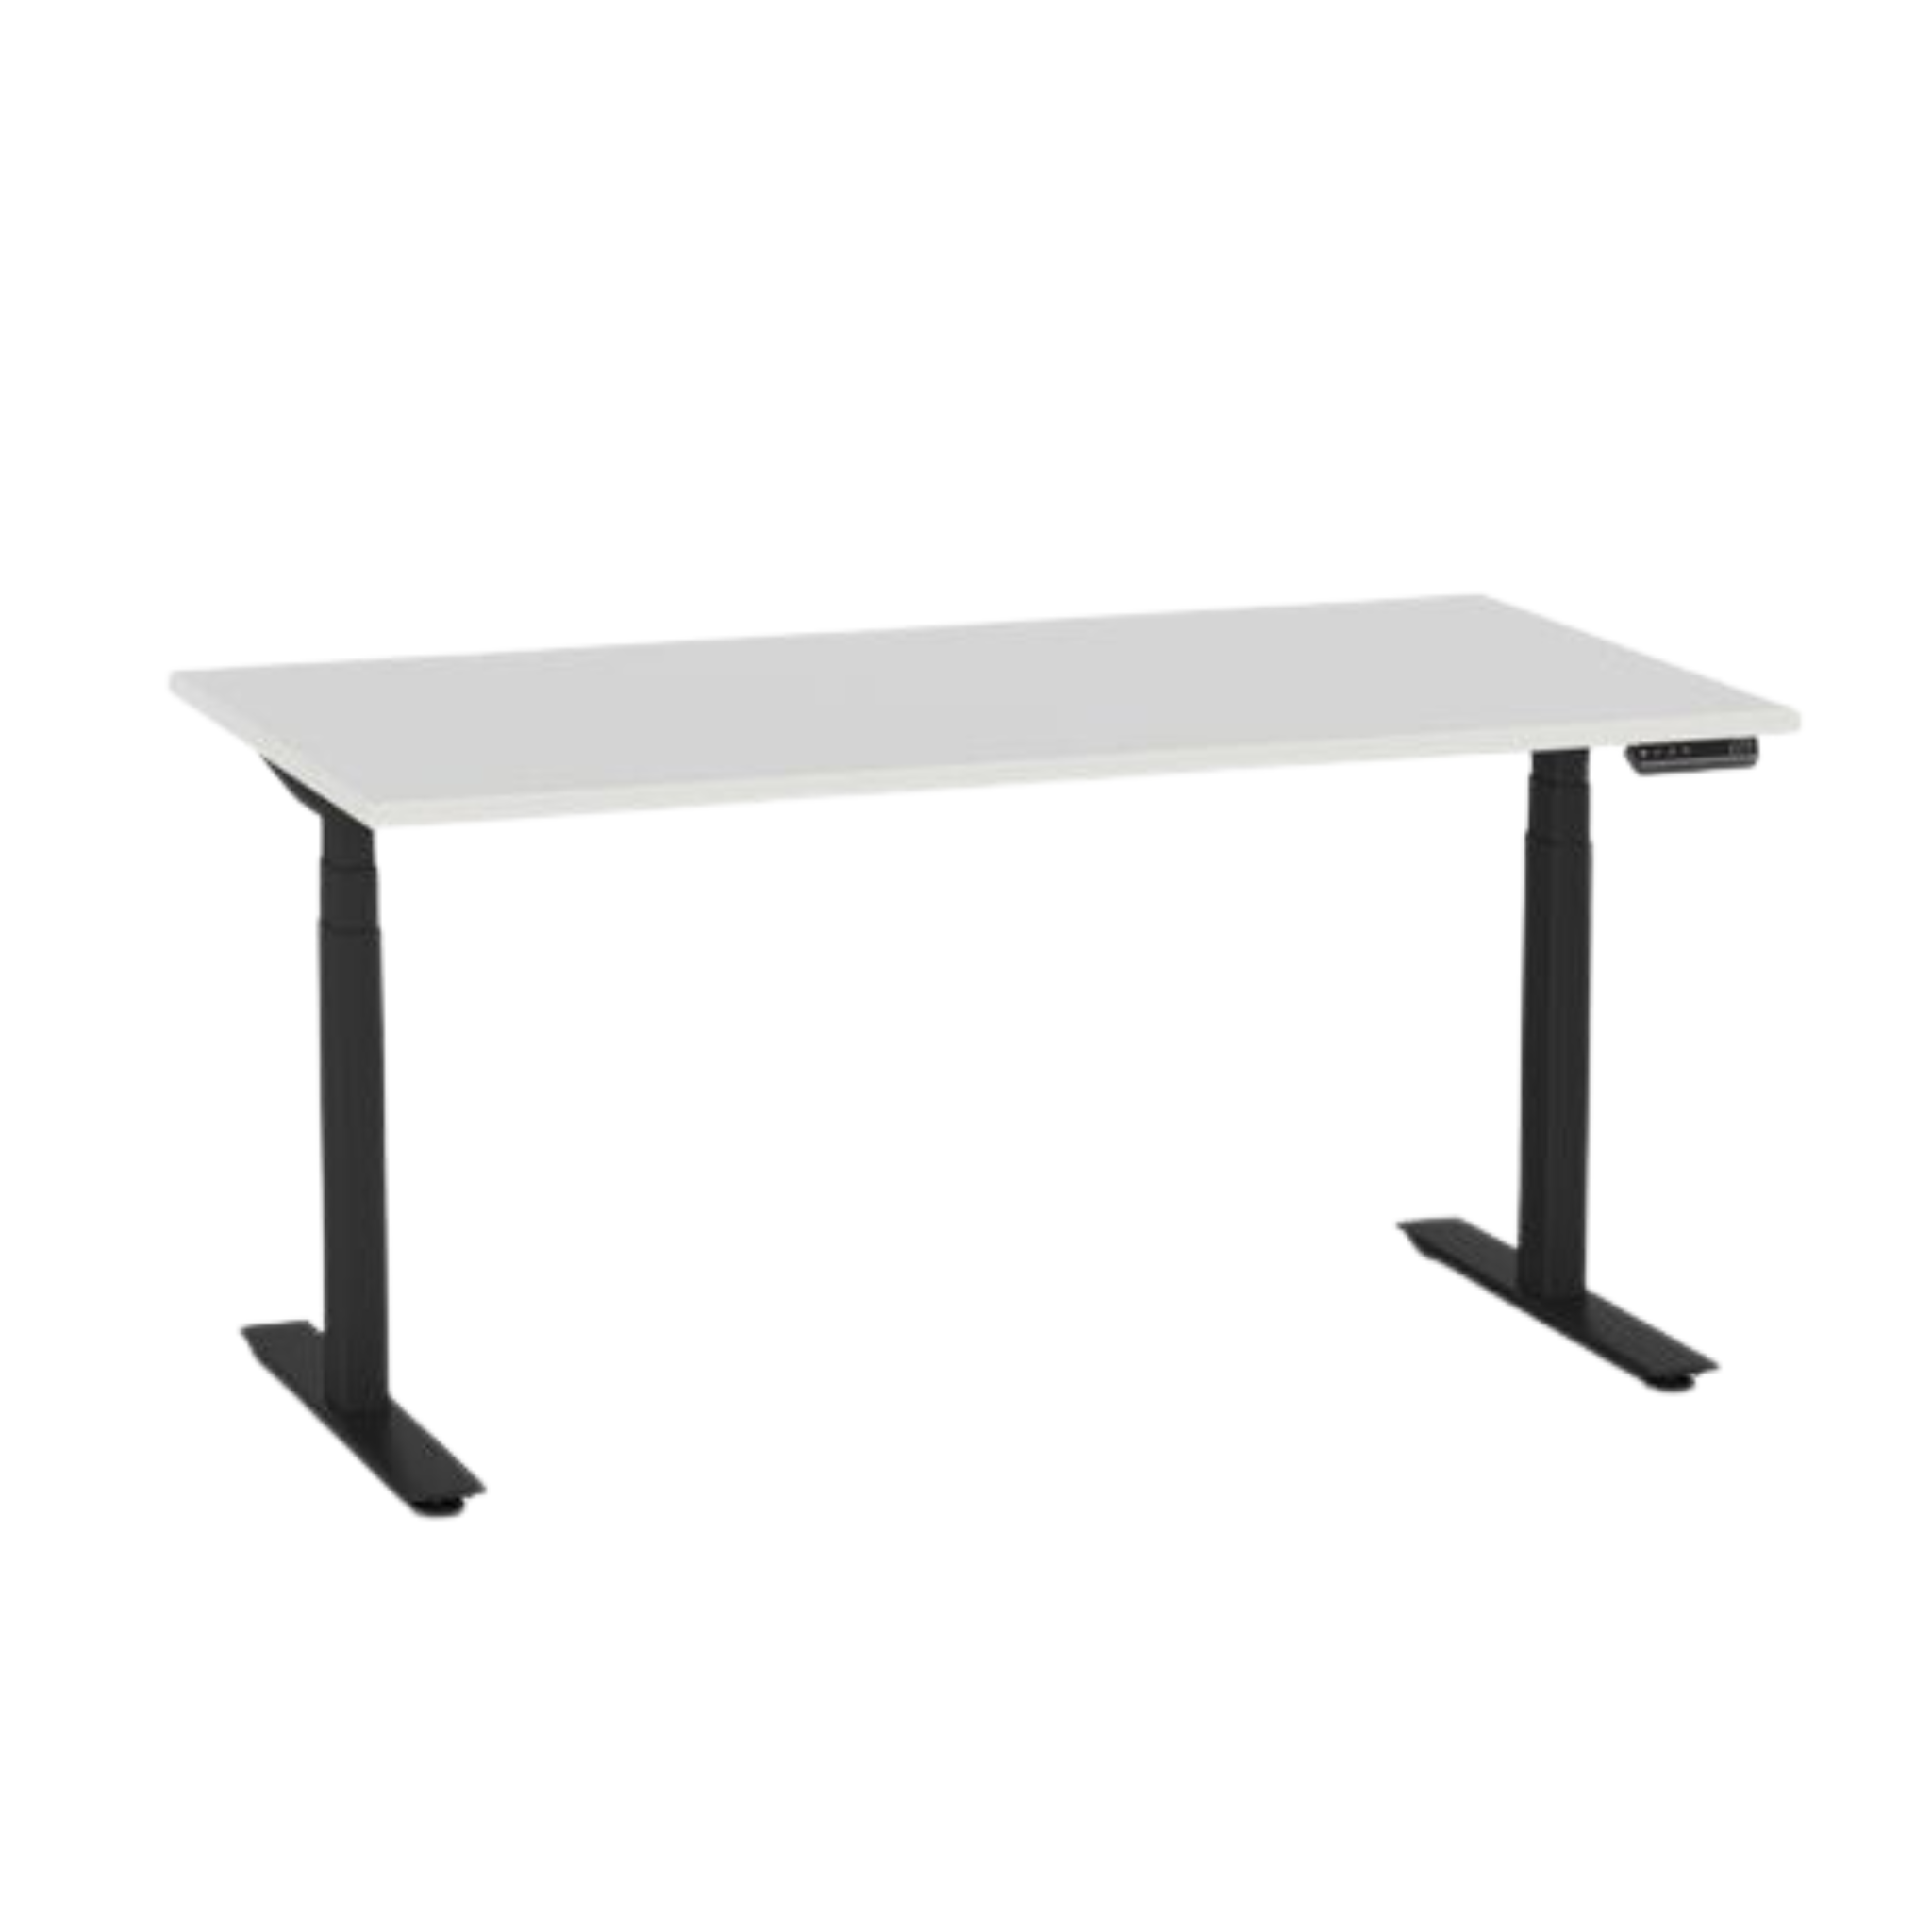 Agile Pro electric sit to stand desk with black frame and white top